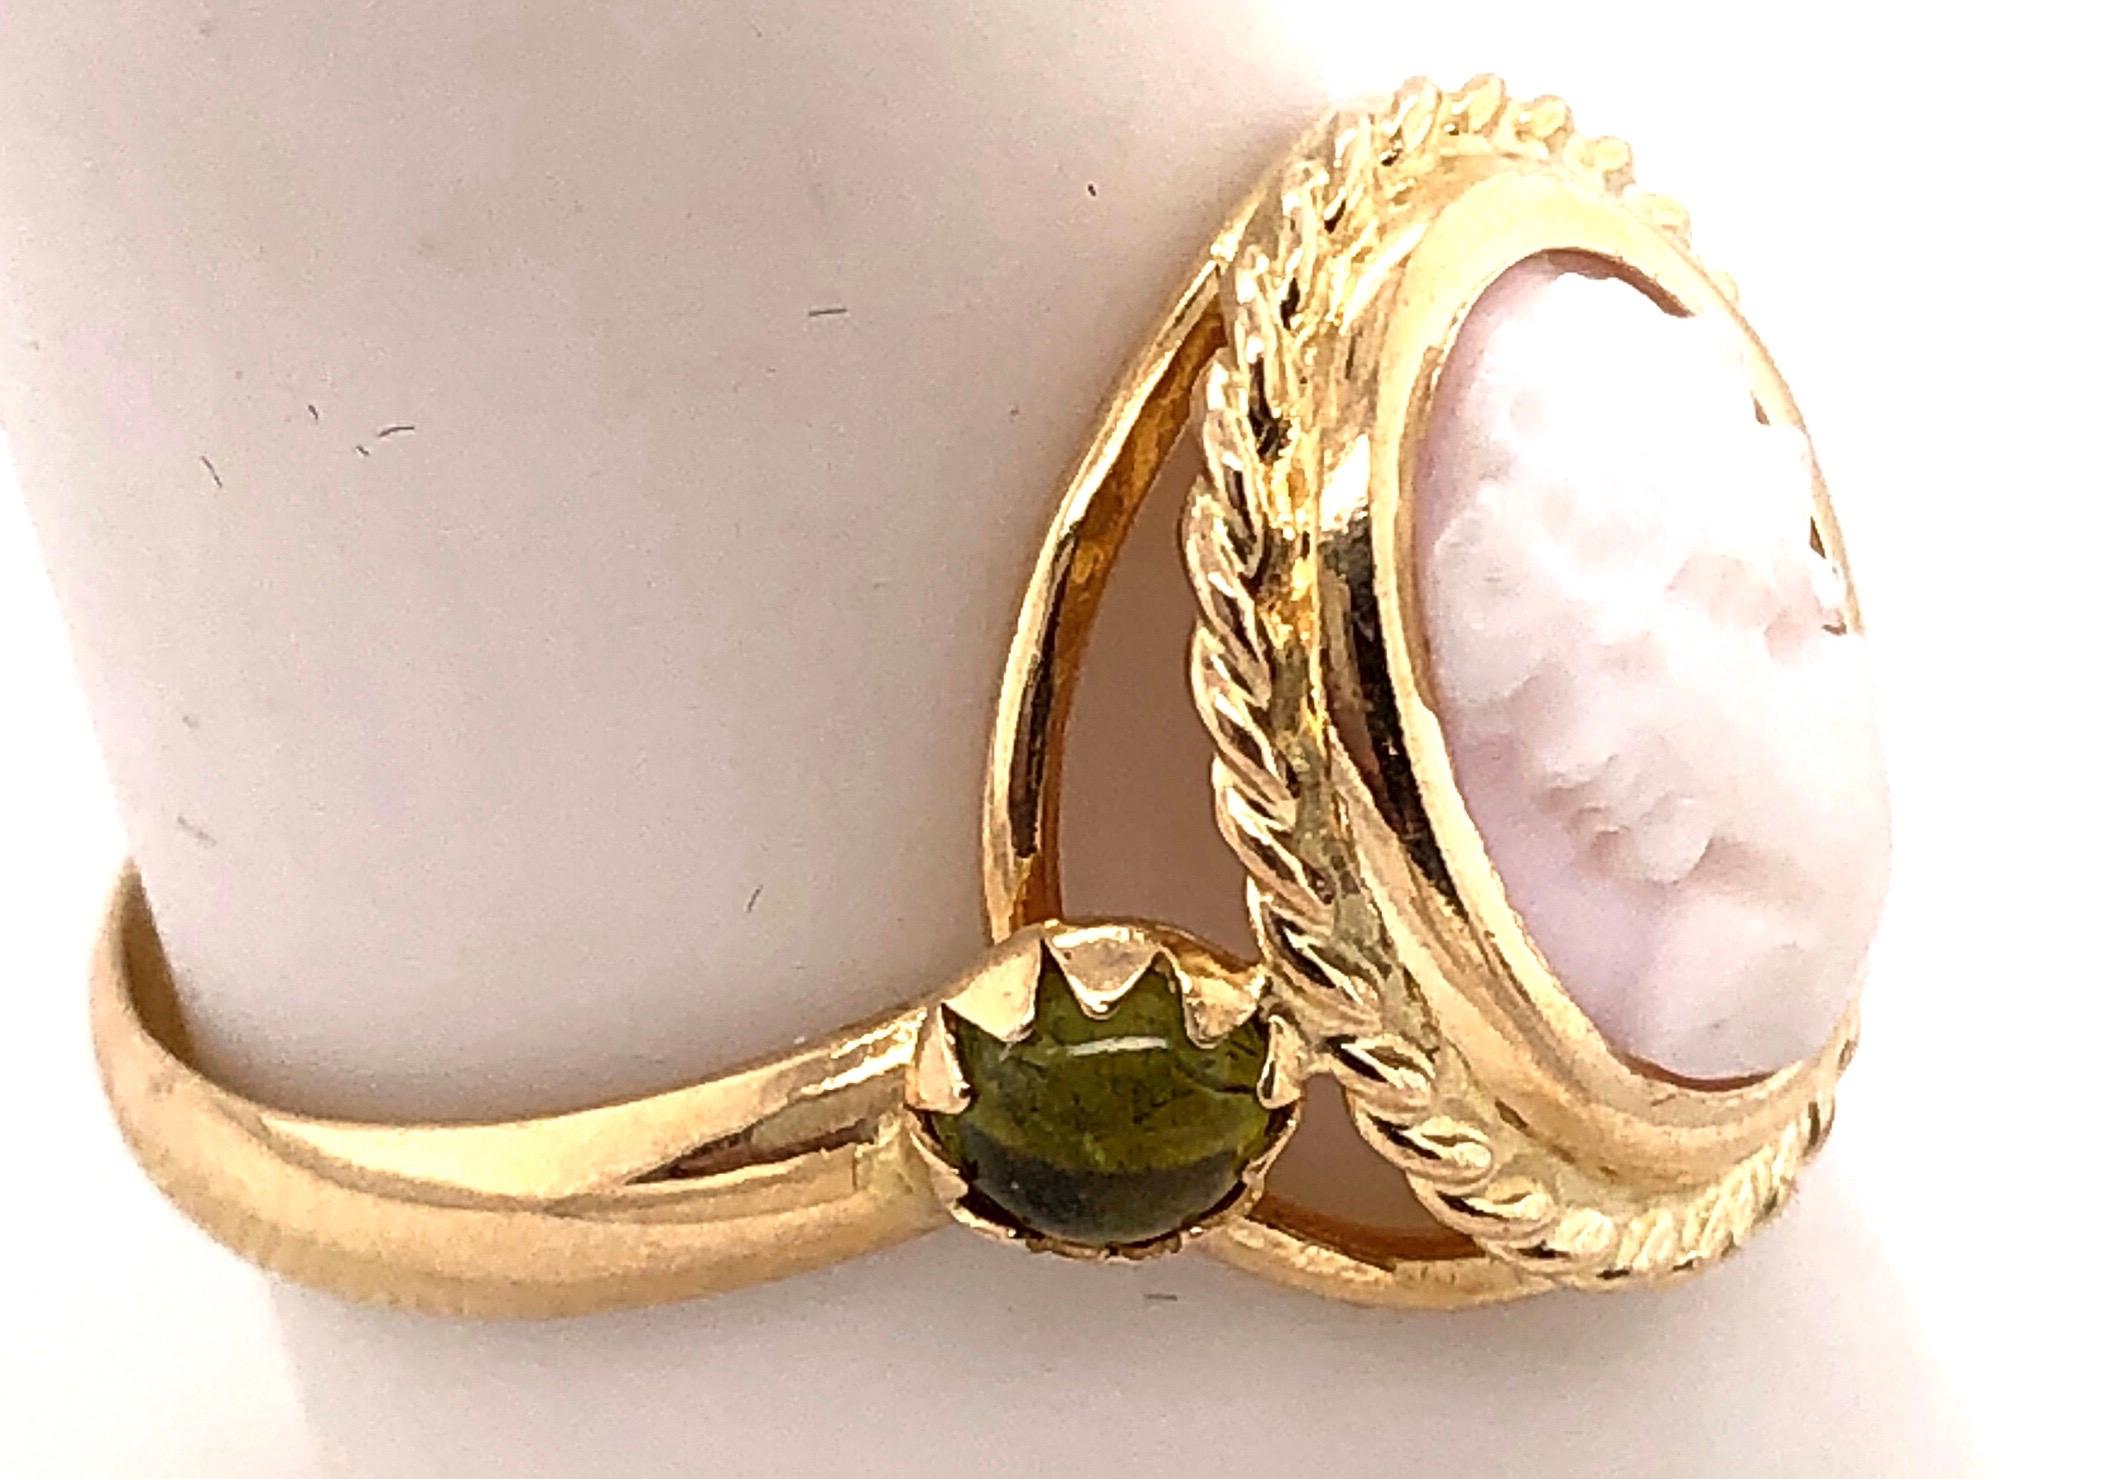 14 Karat Yellow Gold Cameo Ring with Stones .
Size 9
4 grams total weight